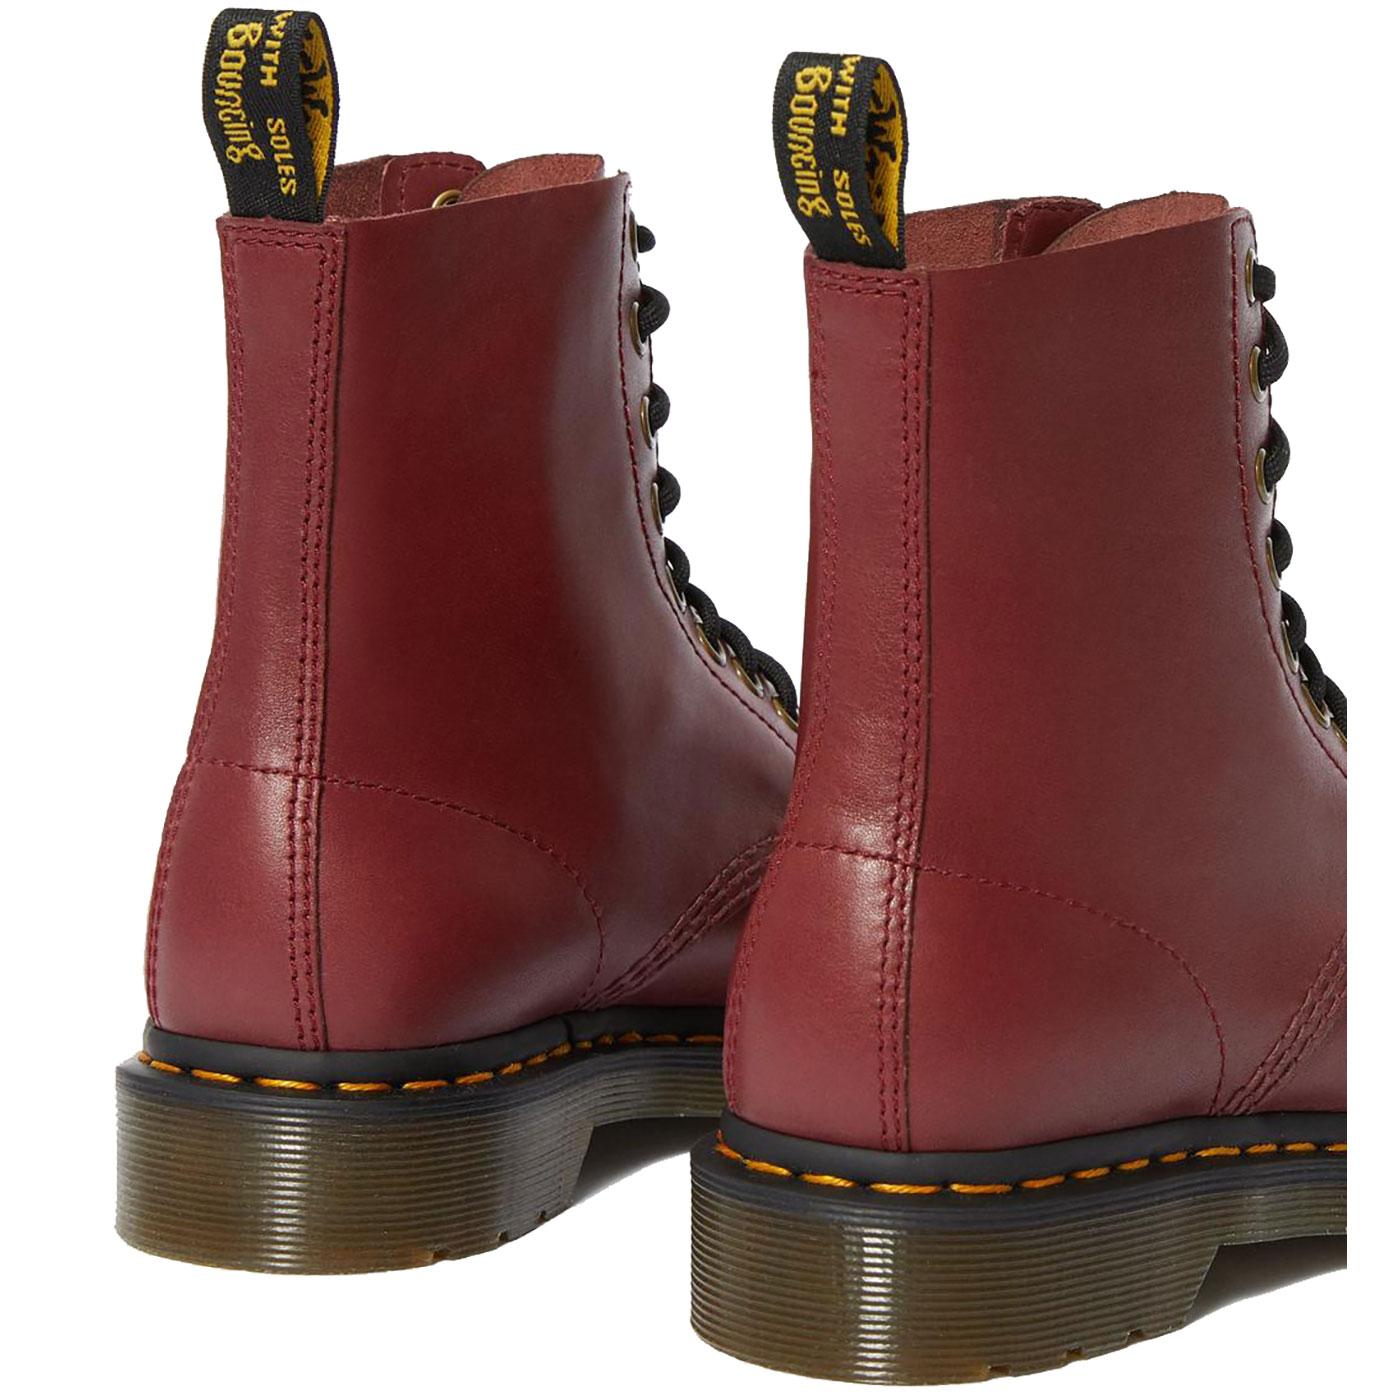 DR MARTENS Womens 1460 Pascal Boots Cherry Red